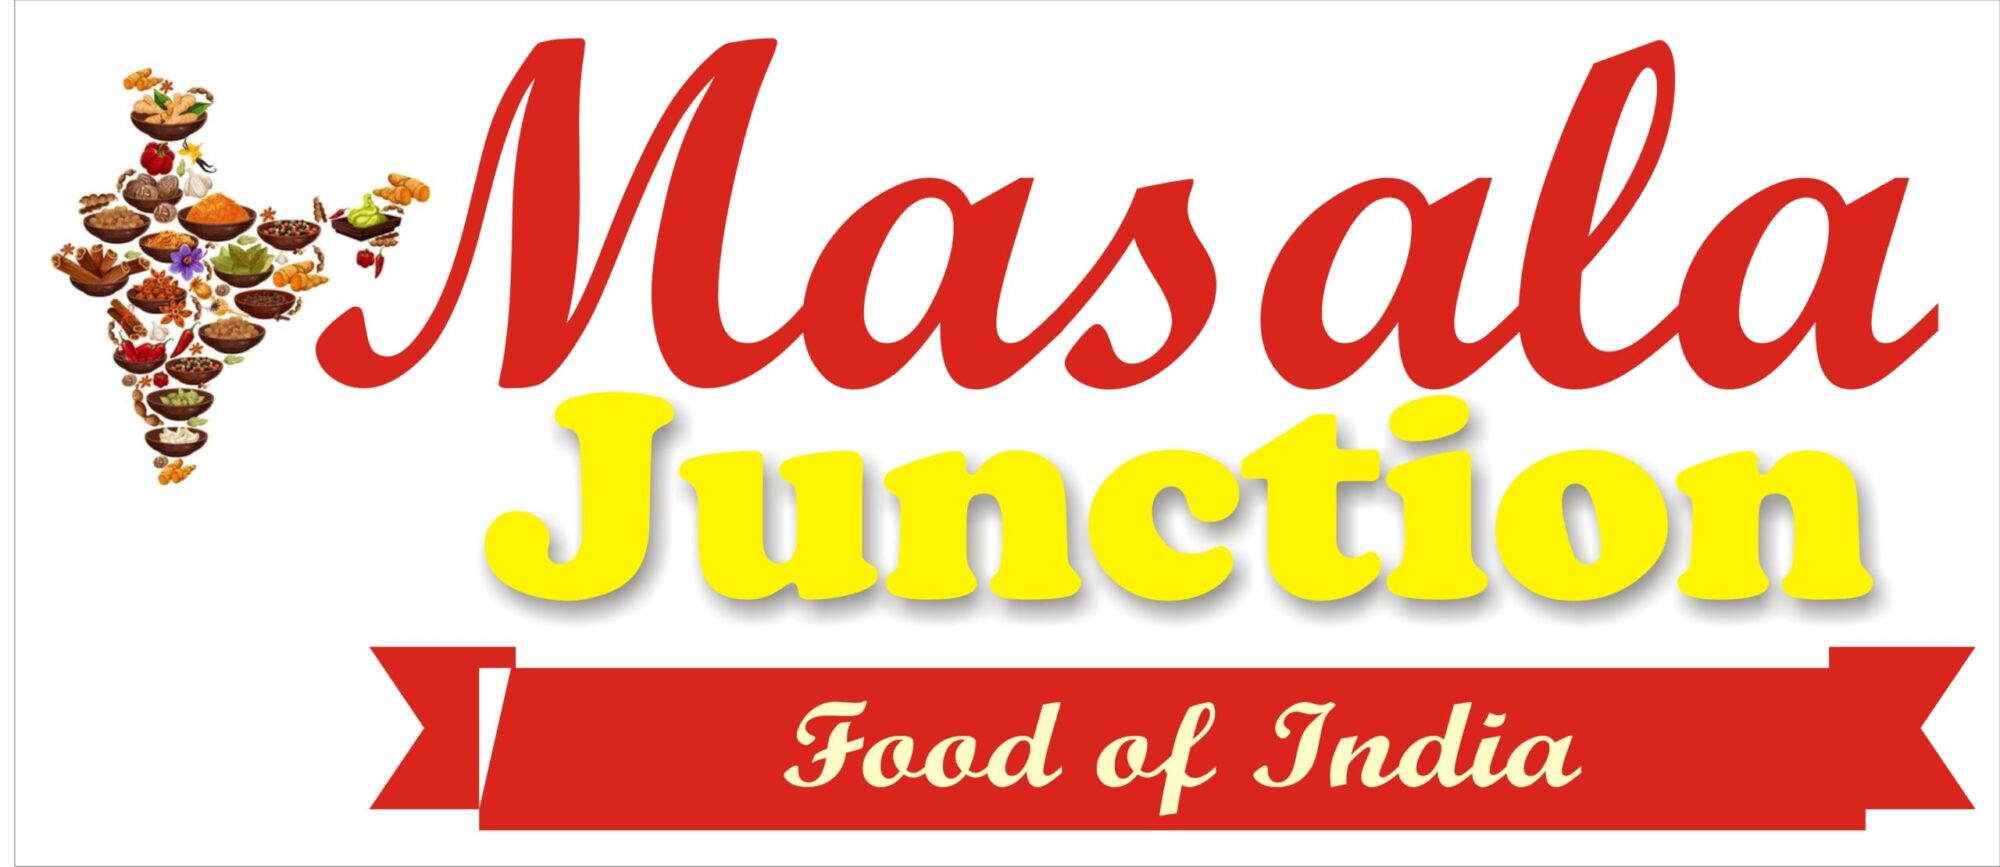 Masala Junction - Authentic food of India in Halifax